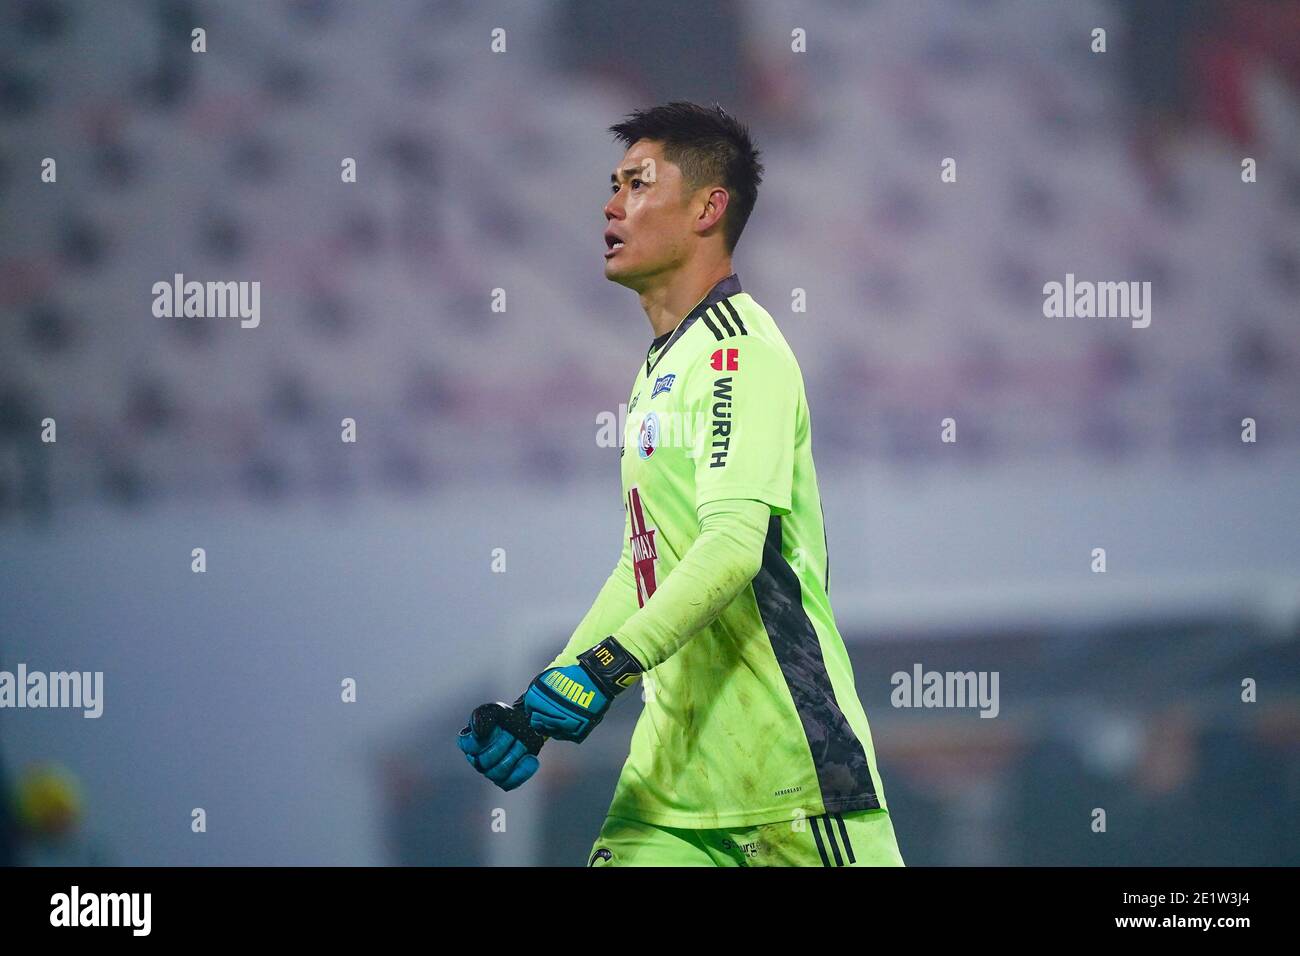 LENS, NETHERLANDS - JANUARY 9: L-R: Eiji Kawashima of RC Strasbourg during the Ligue 1 match between RC Lens and RC Strasbourg at Stade Bollaert-Delelis on January 9, 2021 in Lens, Netherlands (Photo by Jeroen Meuwsen/BSR AgencyOrange PicturesAlamy Live News) Stock Photo